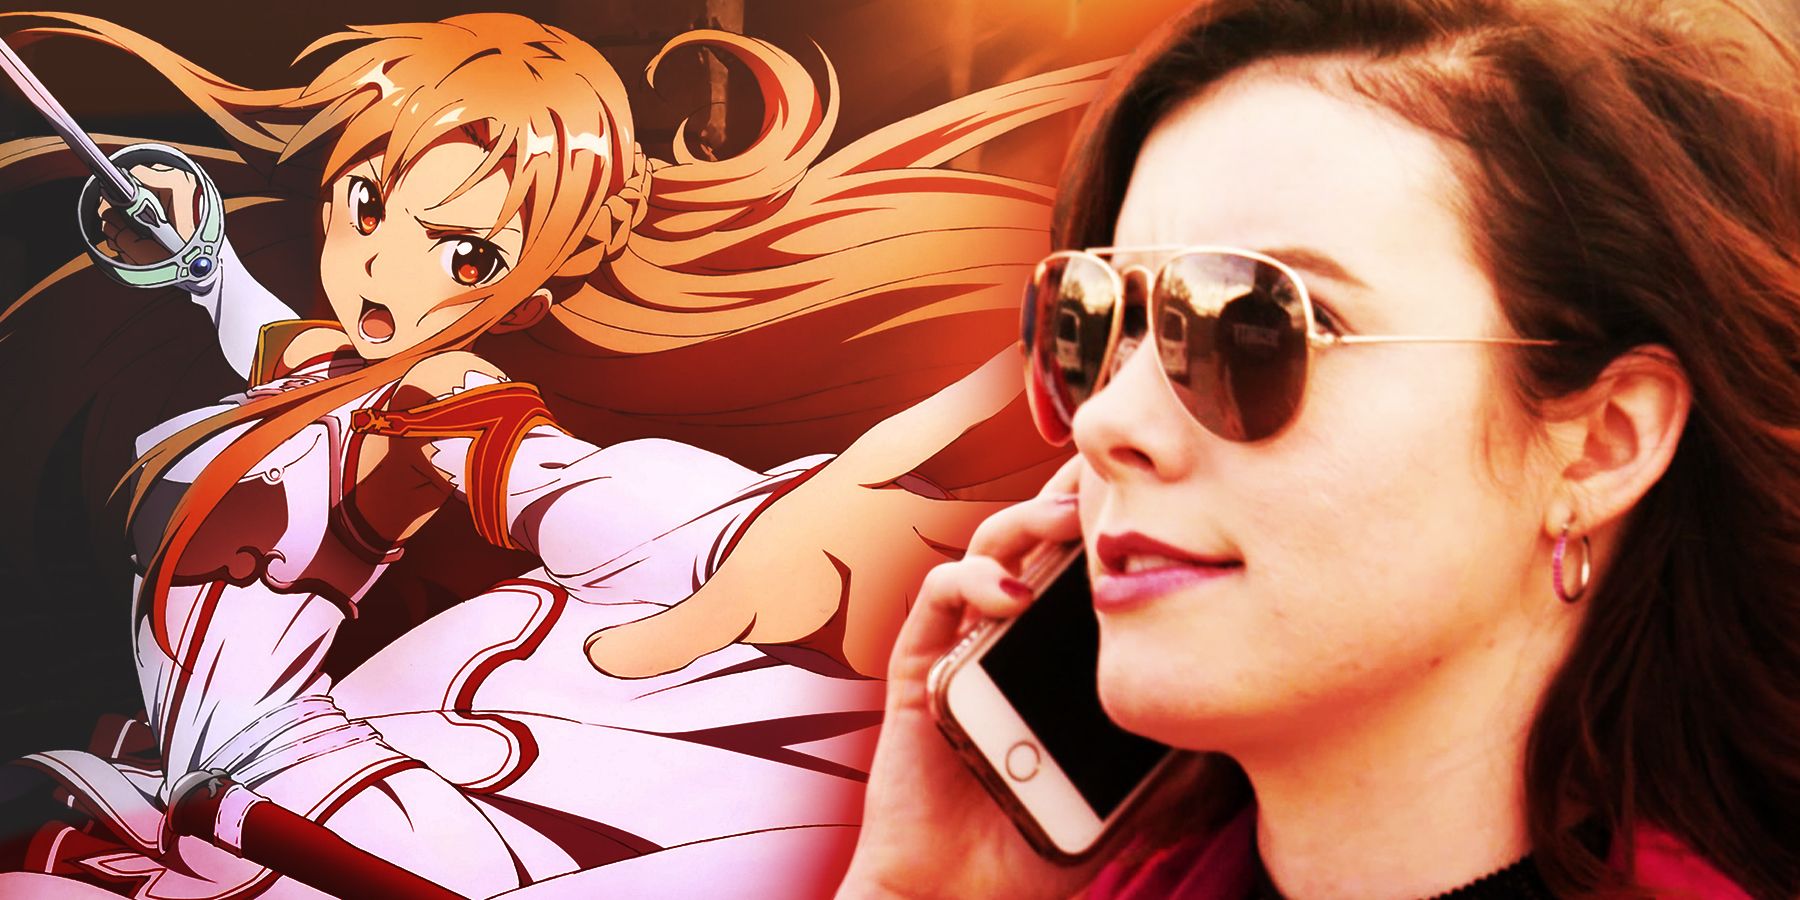 On the left, Asuna Yuuki from 'Sword Art Online' attacks with her sword. Pn the right, Cherami Leigh, Star of 'CONfessionals' and voice for Asuna Yuuki, talks on her phone while wearing sunglasses. 